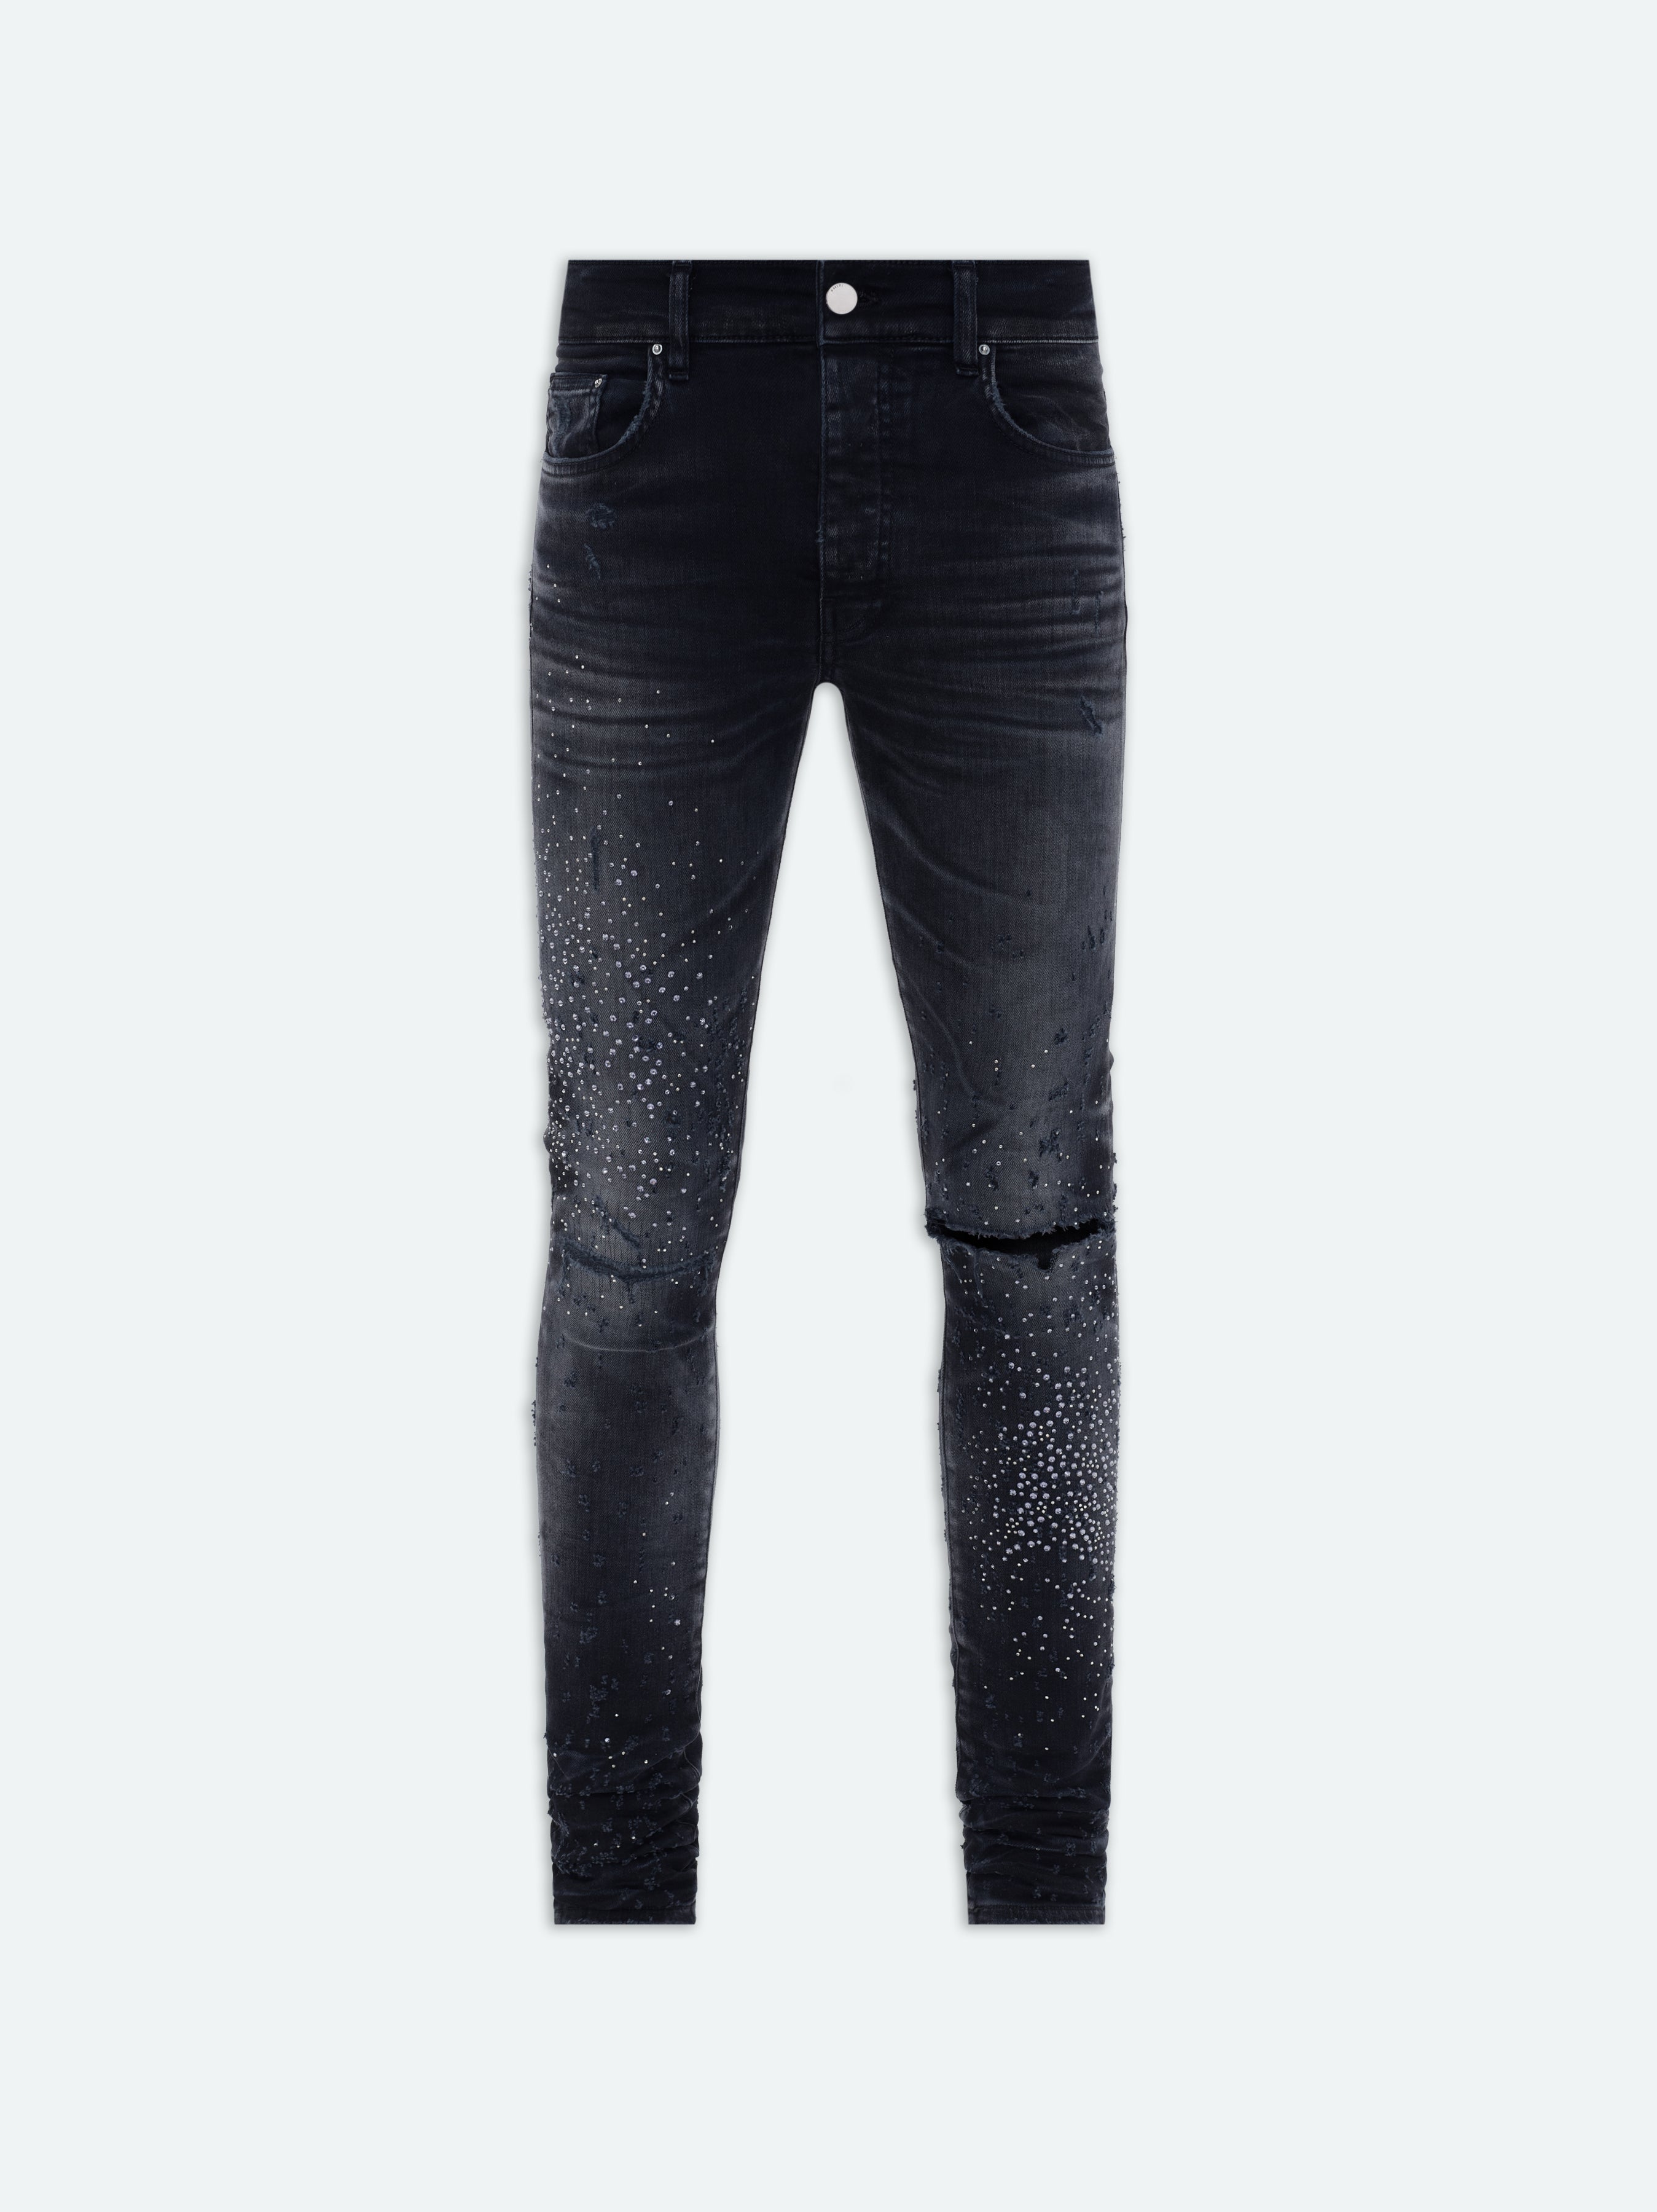 Product CRYSTAL SHOTGUN JEAN - Faded Black featured image